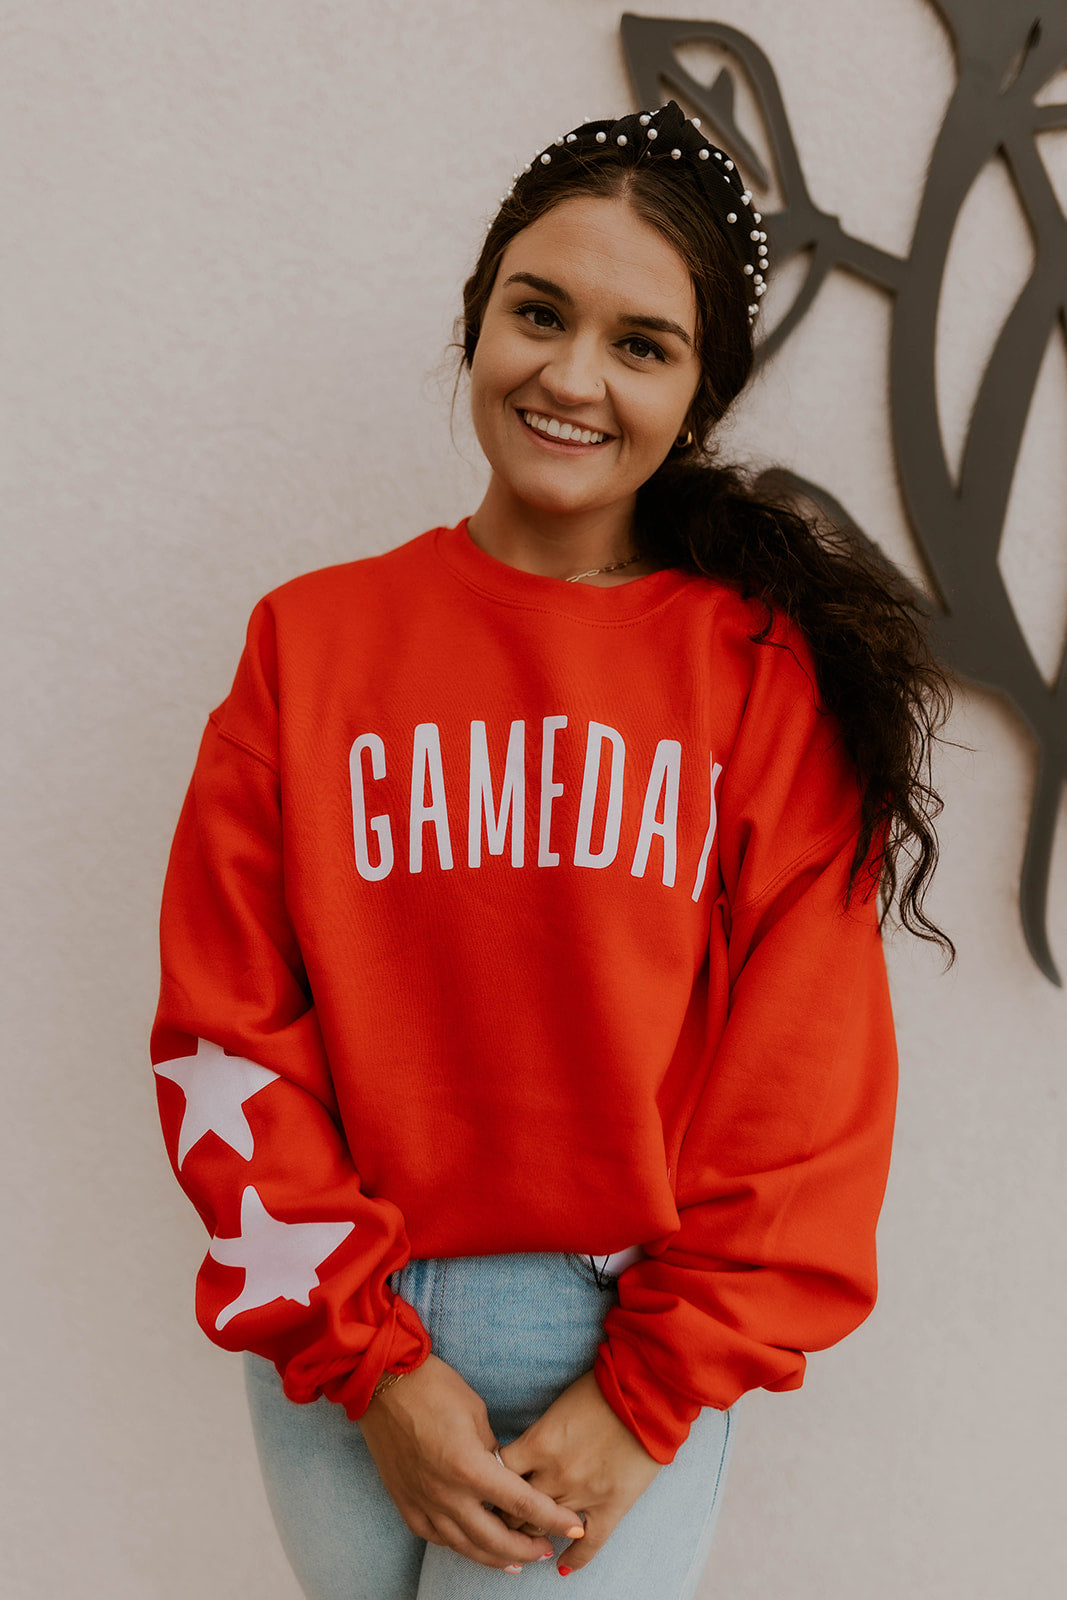 Rvidbe Game Day Shirts Women,Womens Sparkle Football Sequin Rugby Sweatshirt  Game Day Crewneck Shirts Long Sleeve Pullovers at  Women's Clothing  store